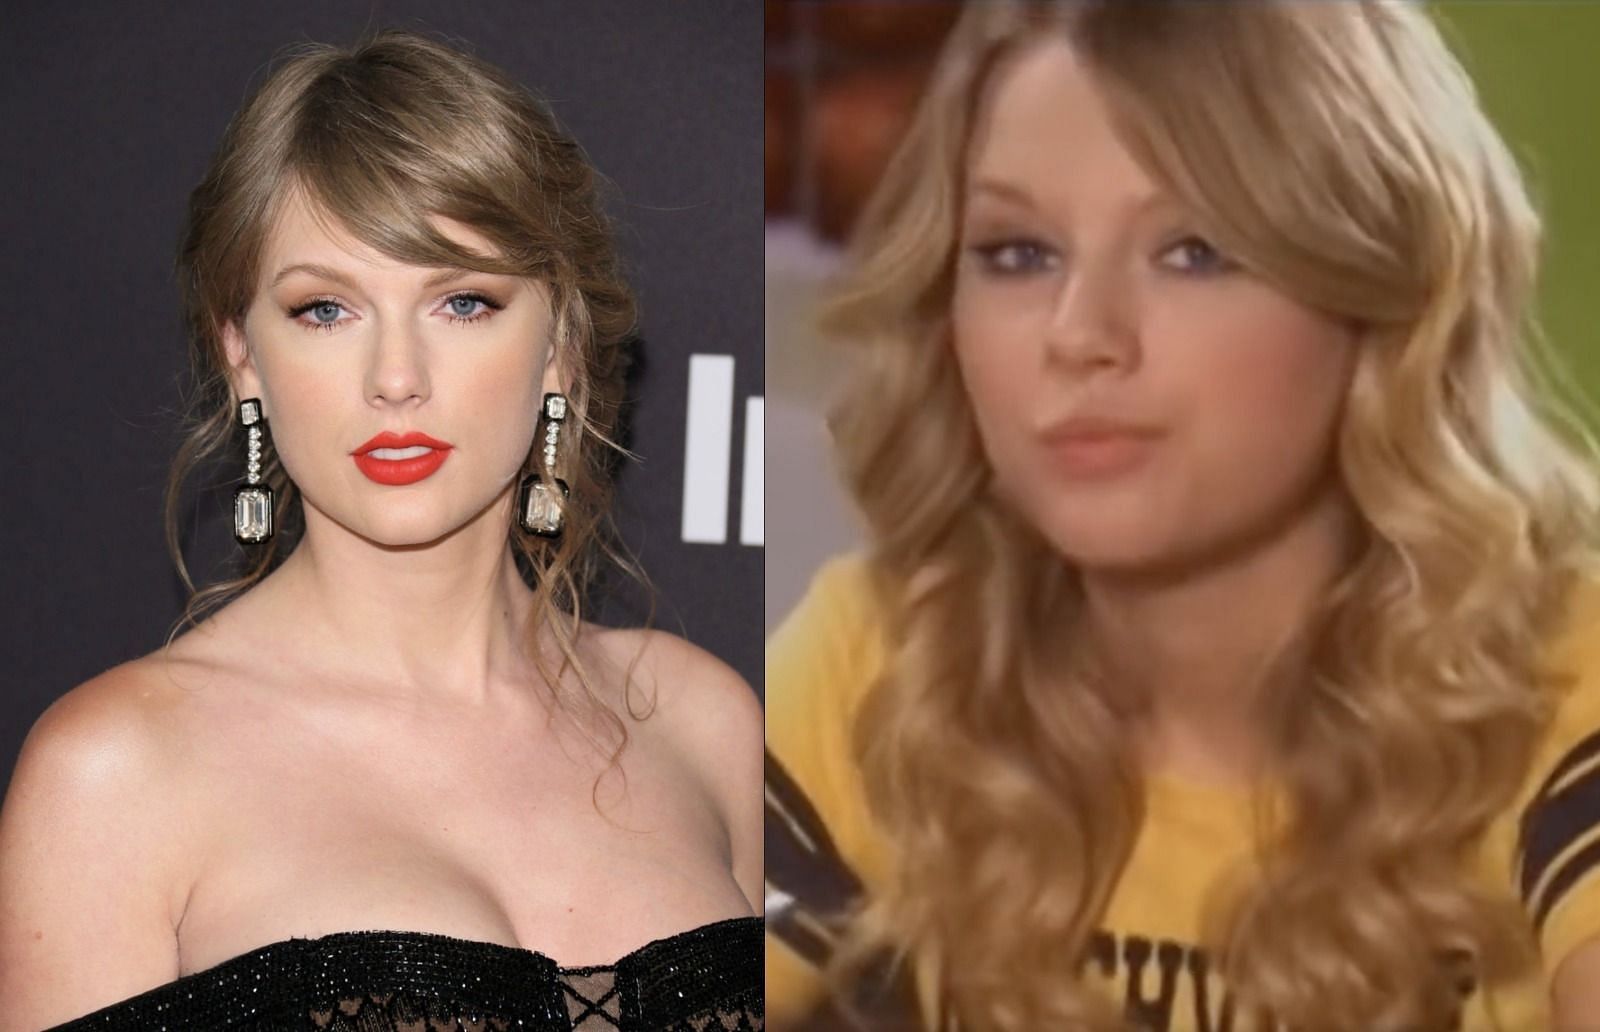 Taylor Swift once starred in a commercial for the Nashville Predators